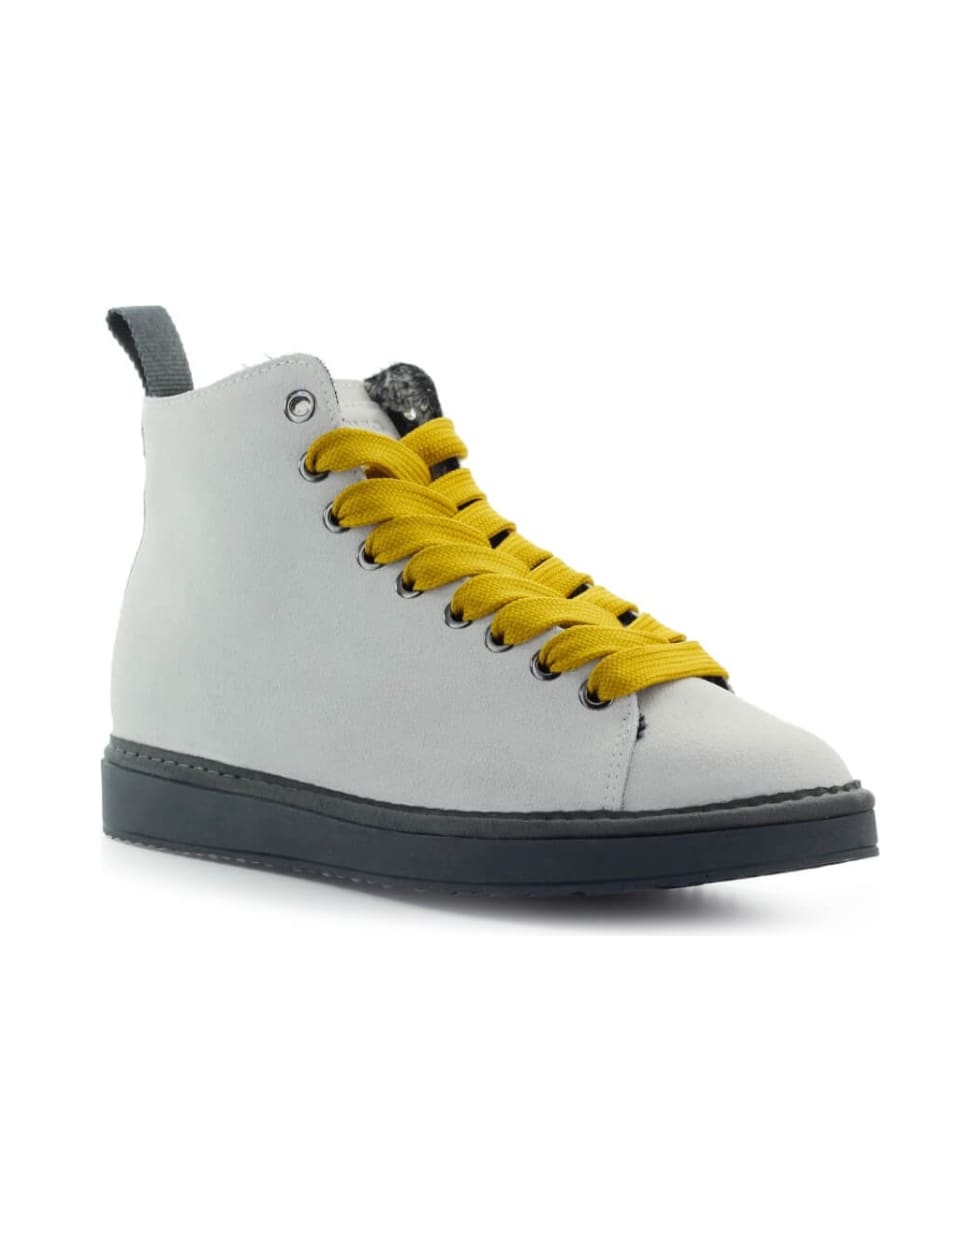 Panchic White Ocher Suede Ankle Boot - White/Deep Yellow